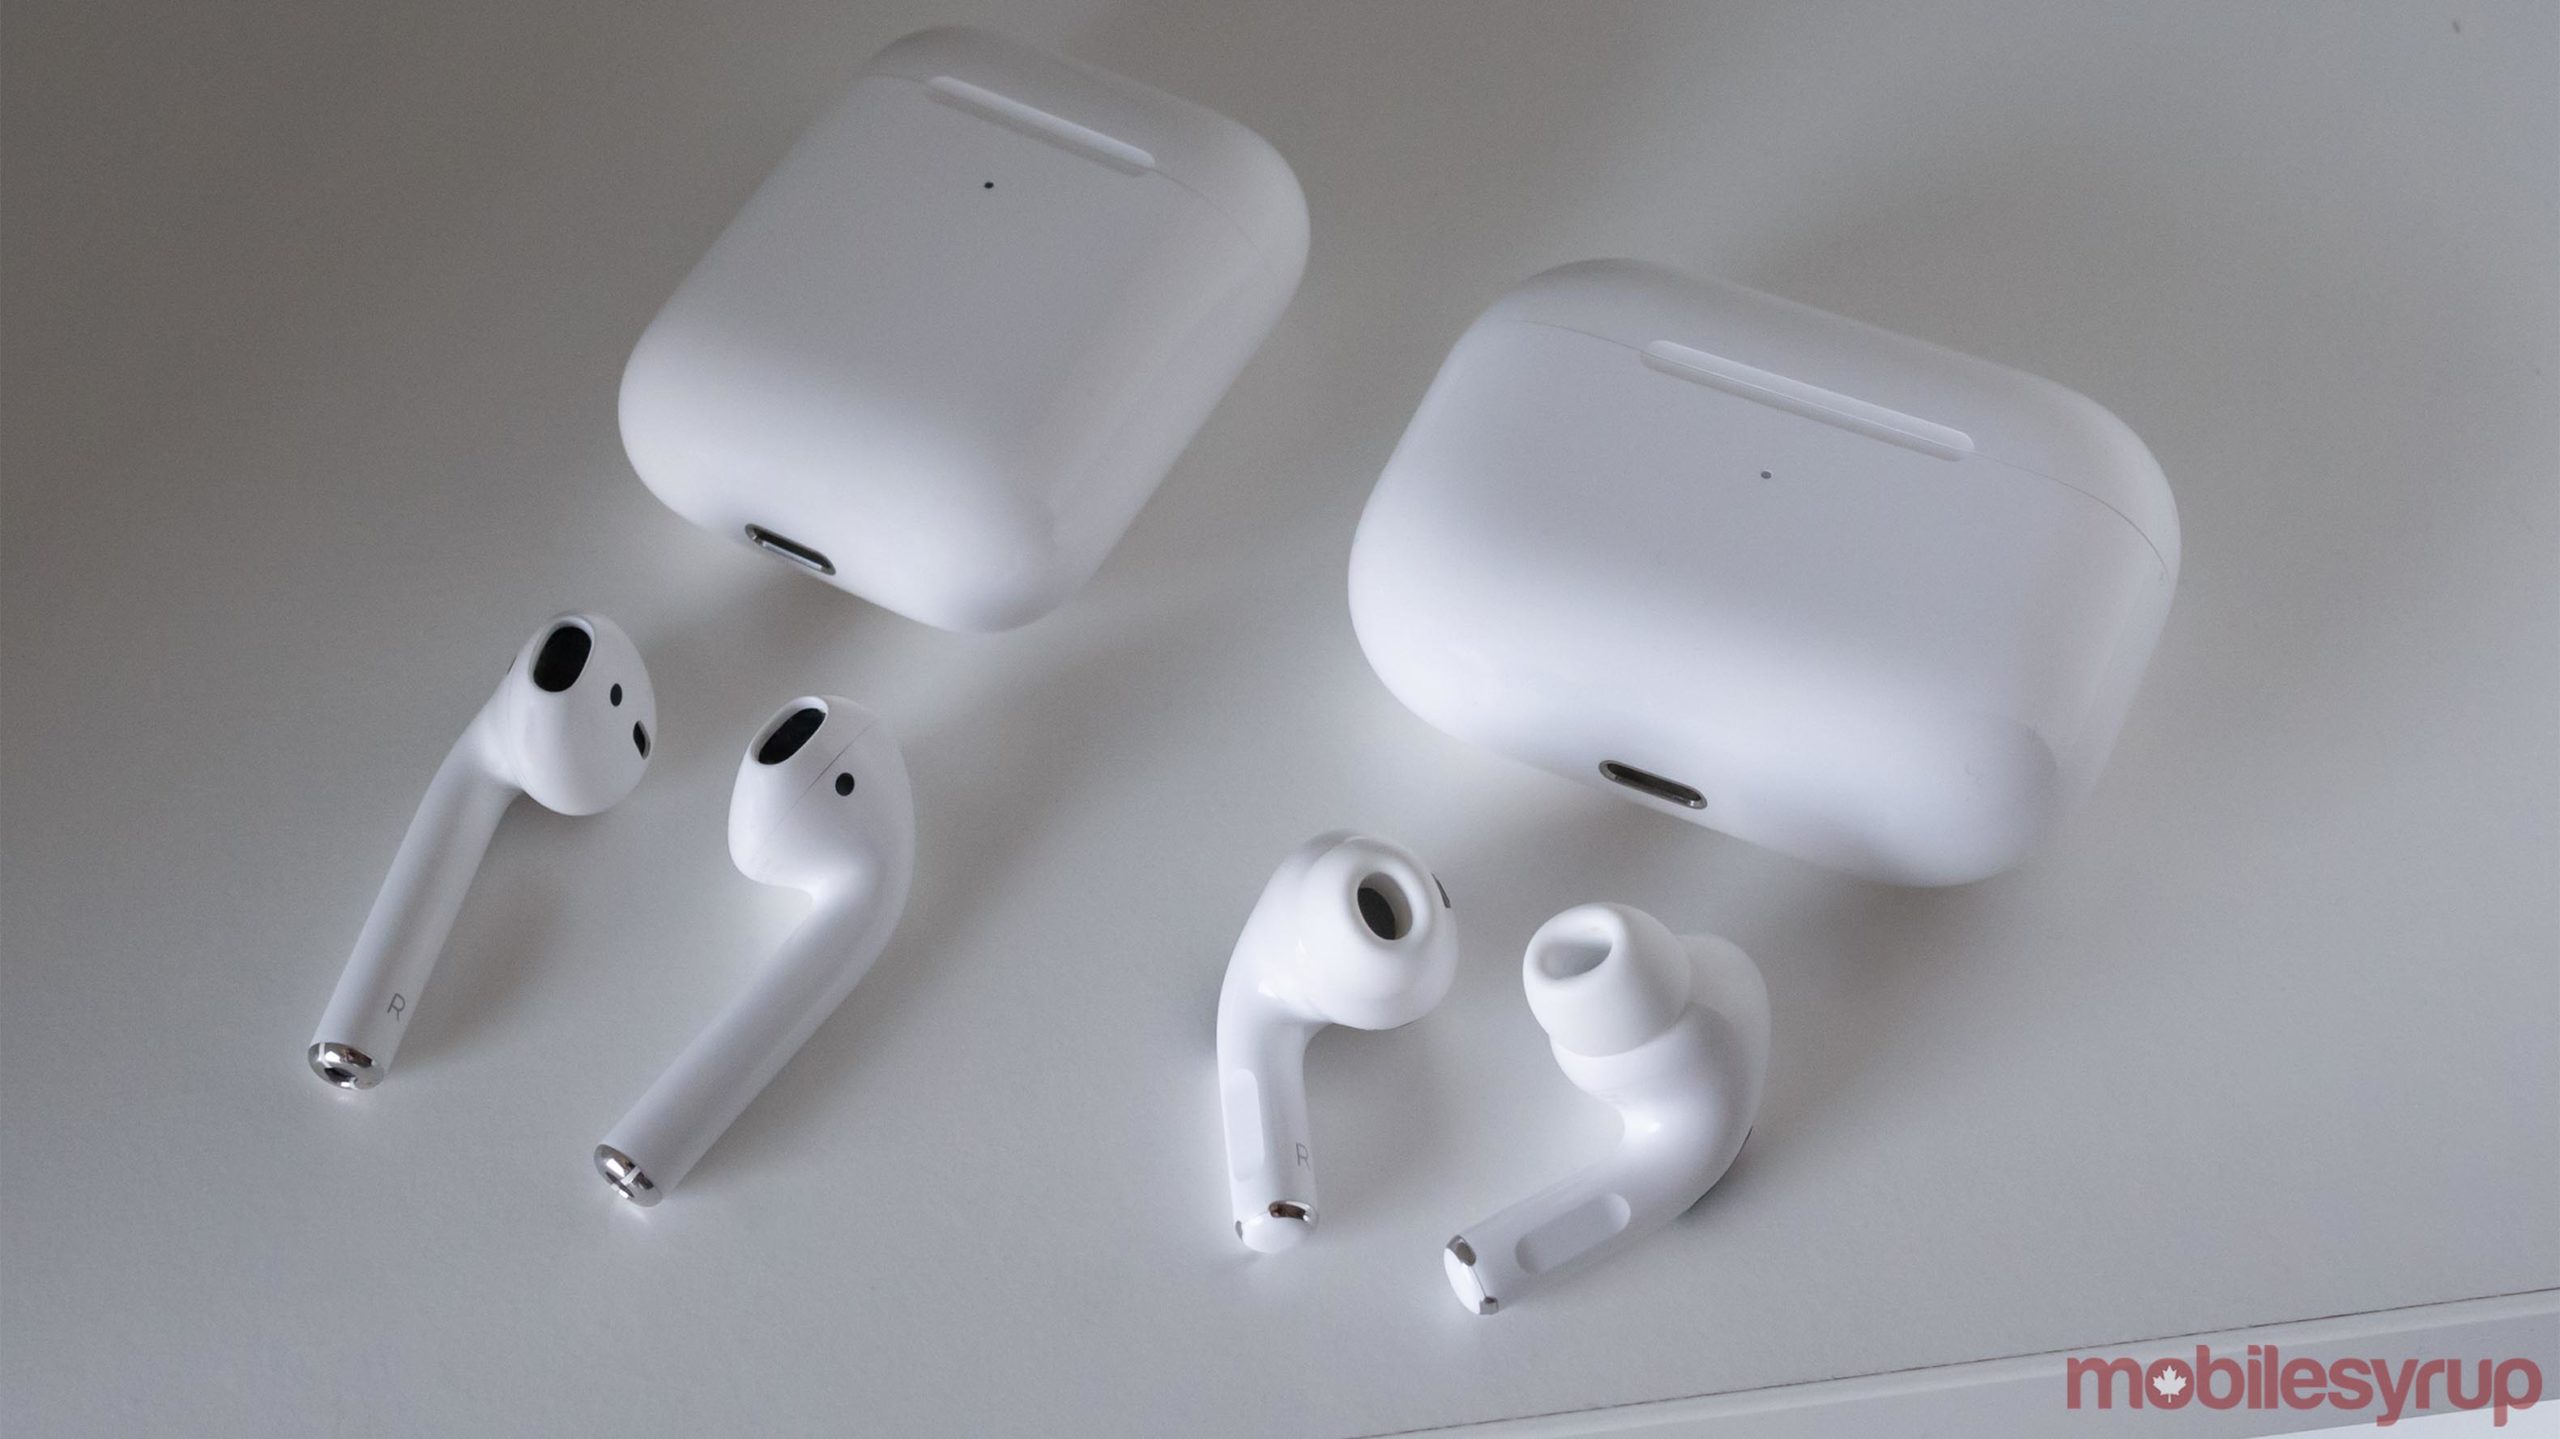 Apple AirPods are on sale at Visions Electronics in Canada